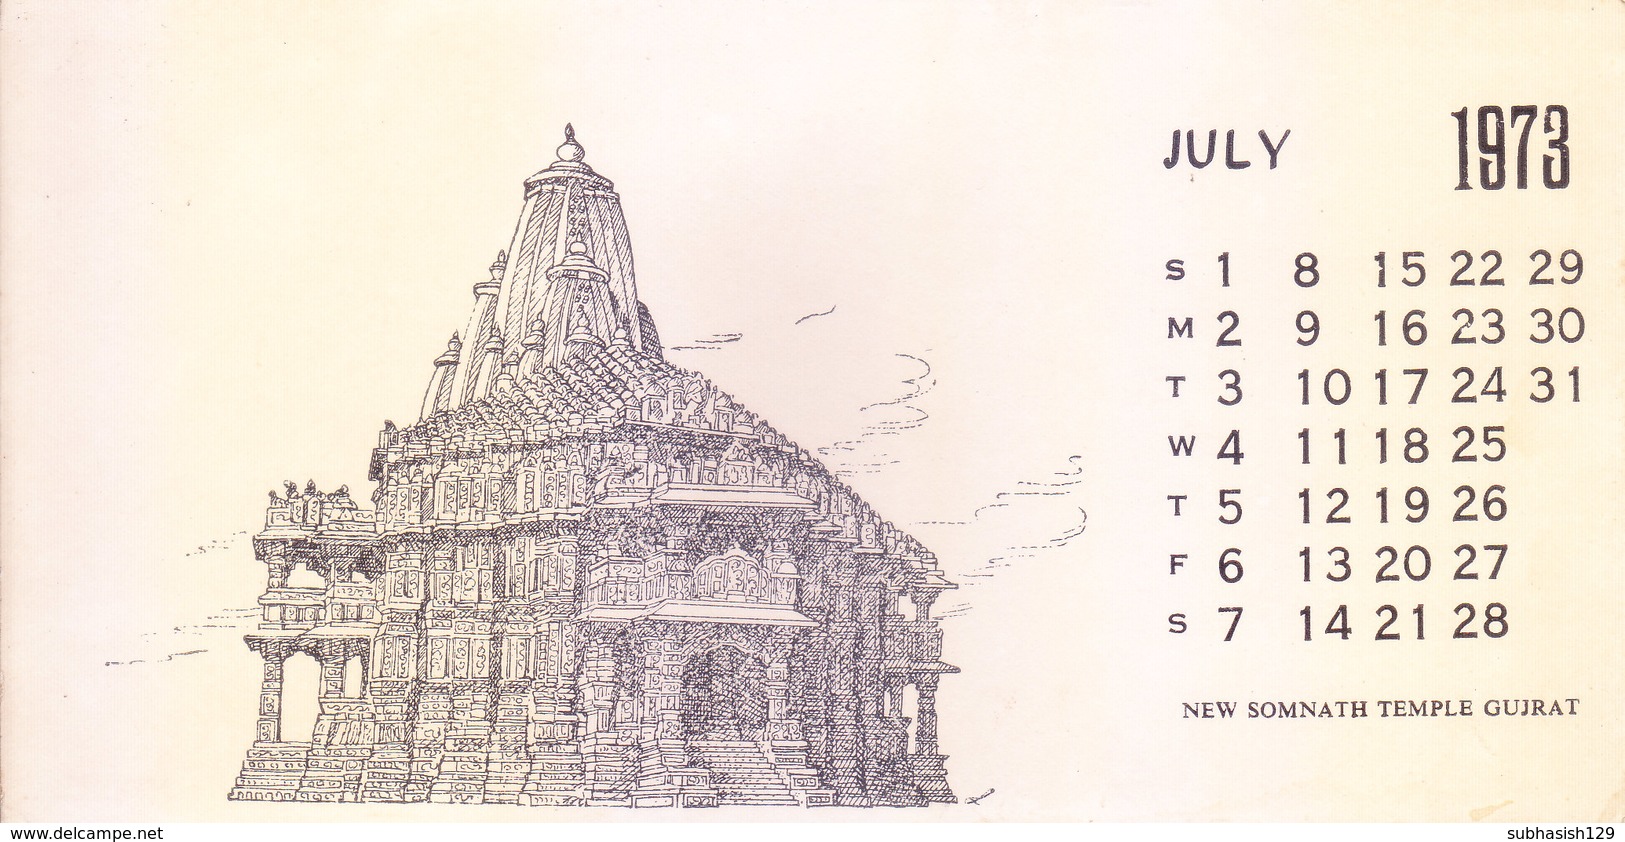 INDIA - RARE AND OLD PAPER CALENDAR - JULY 1973 -  PRINTED HAND SKETCH - NEW SOMENATH TEMPLE, GUJRAT - ANTIQUE ITEM - Groot Formaat: 1971-80